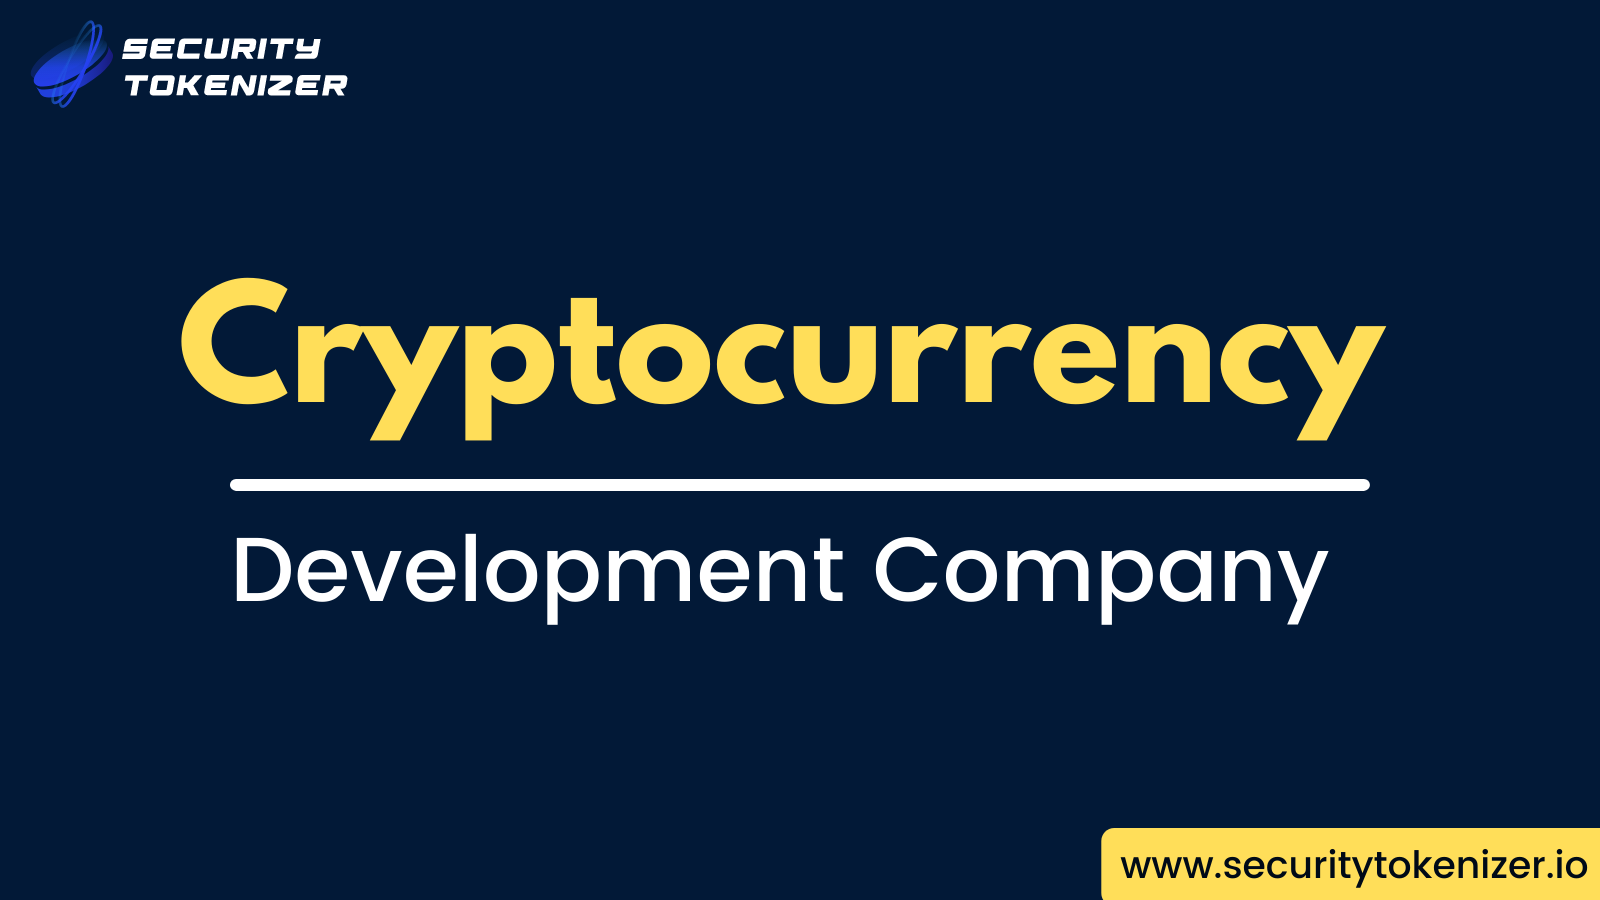 Article about Cryptocurrency Development Company - Security Tokenizer